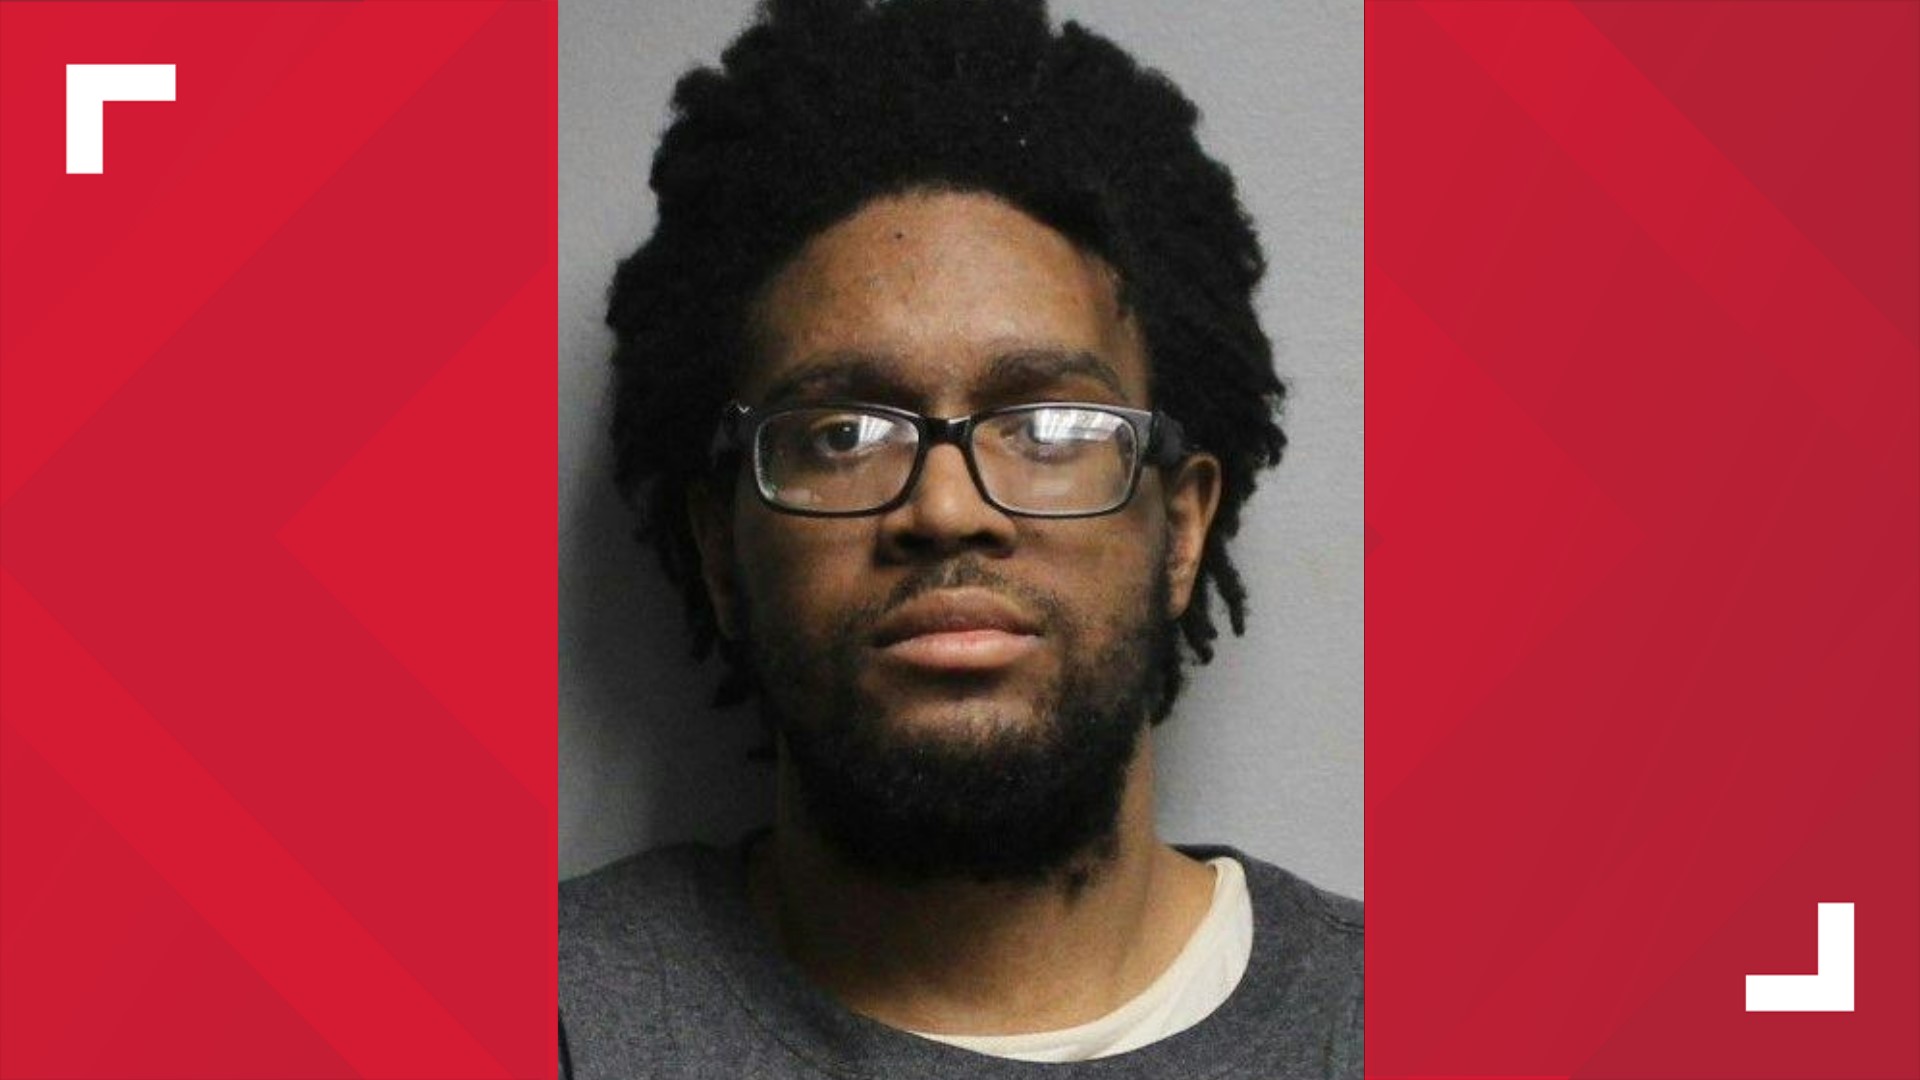 Lorenzo Winfield, 22, pleaded guilty to sexually exploiting minors, possessing child pornography and communicating interstate with the intent to extort.